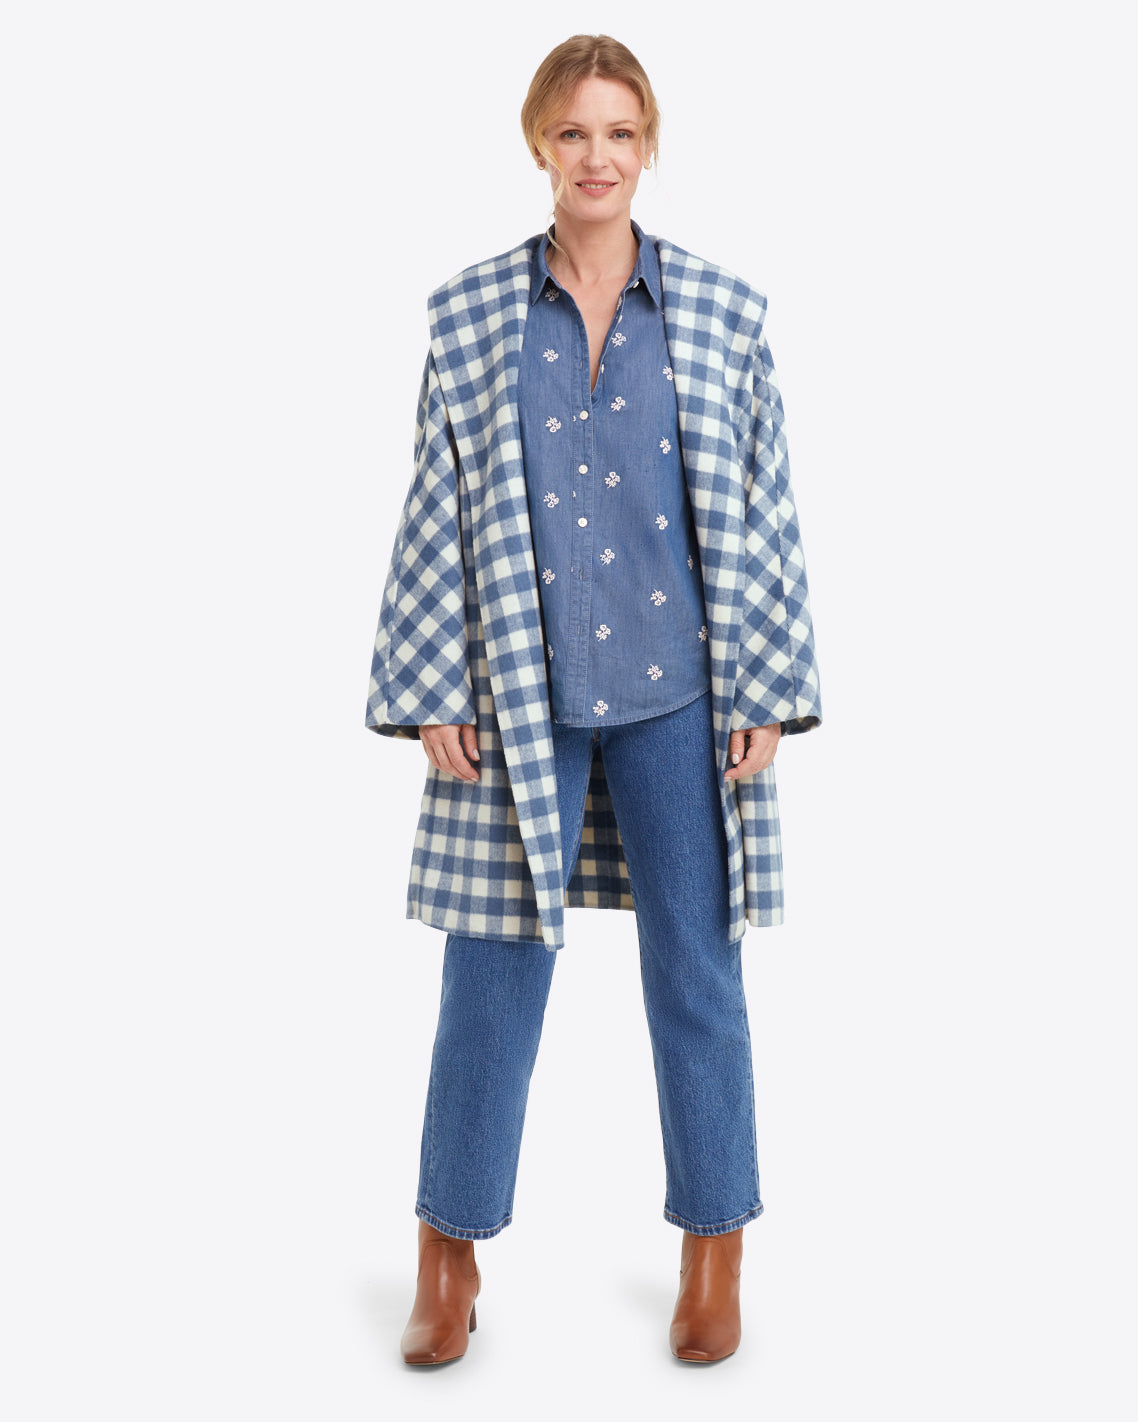 Shawl Collar Belted Coat in Gingham